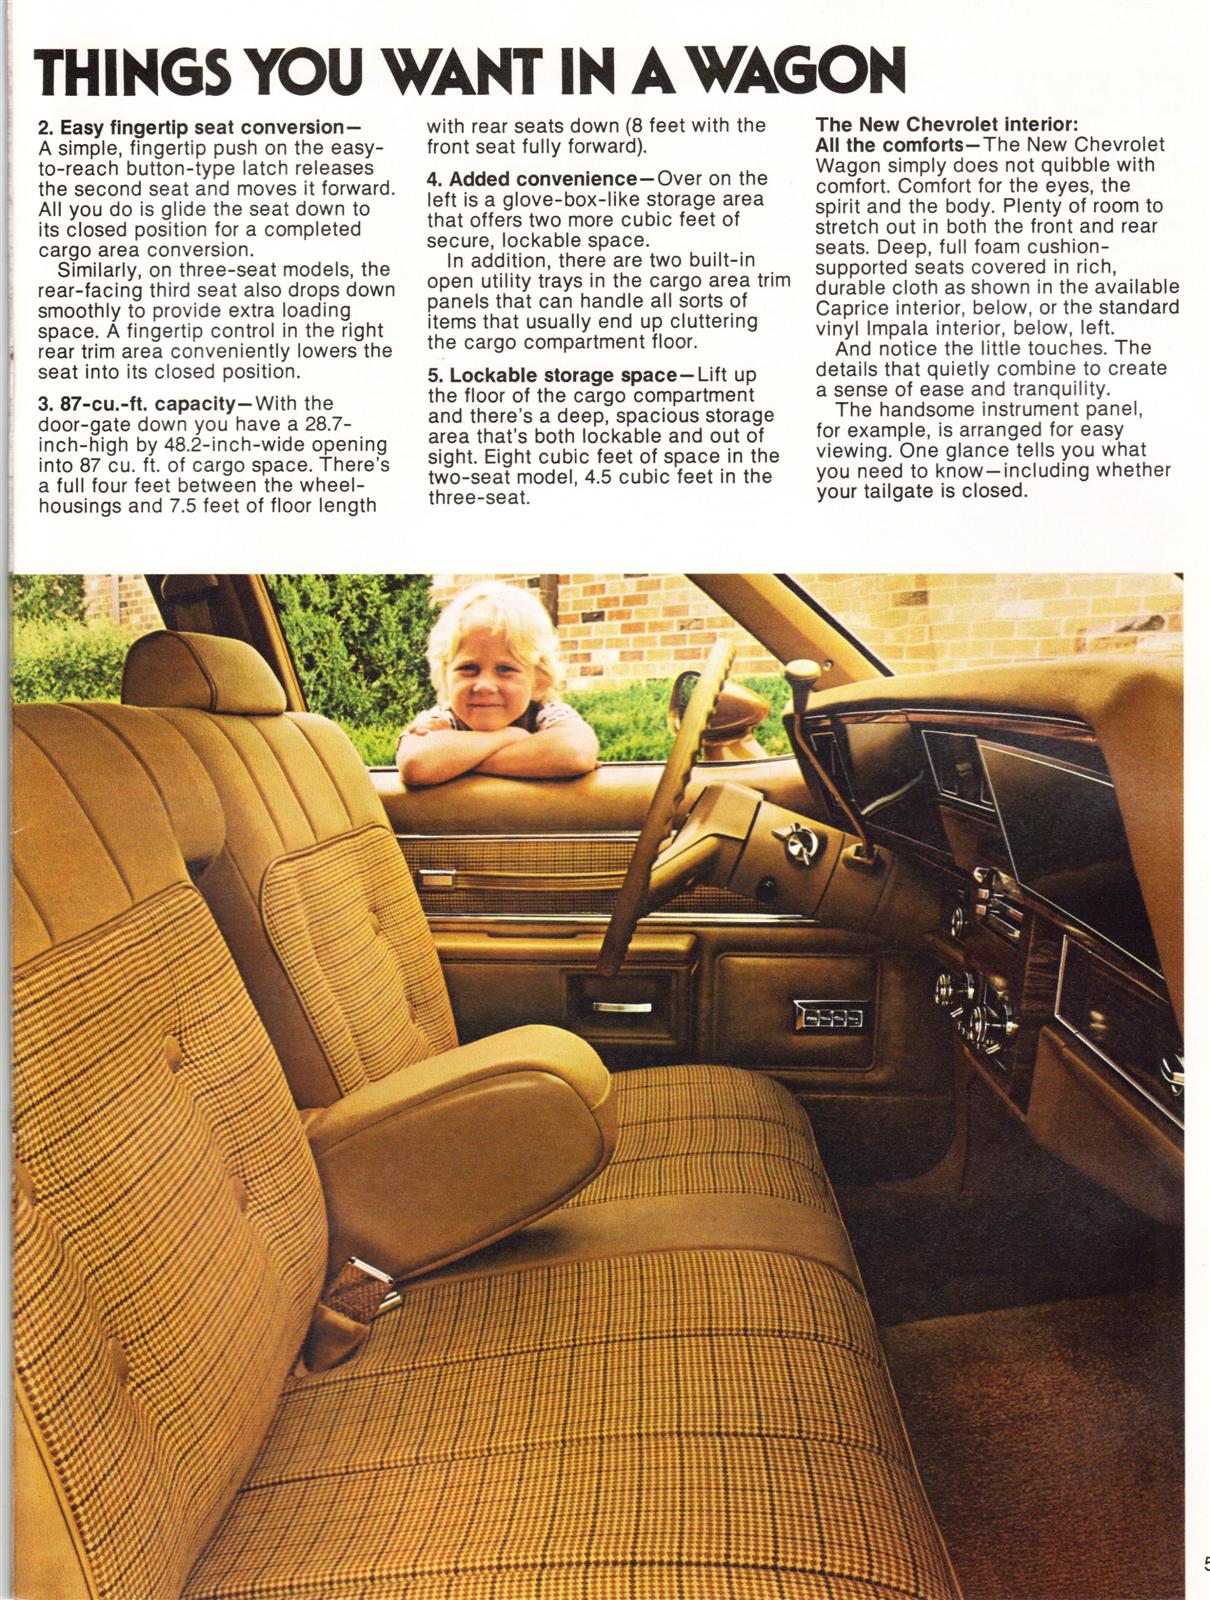 1978 Chevrolet Wagons Brochure Page 9